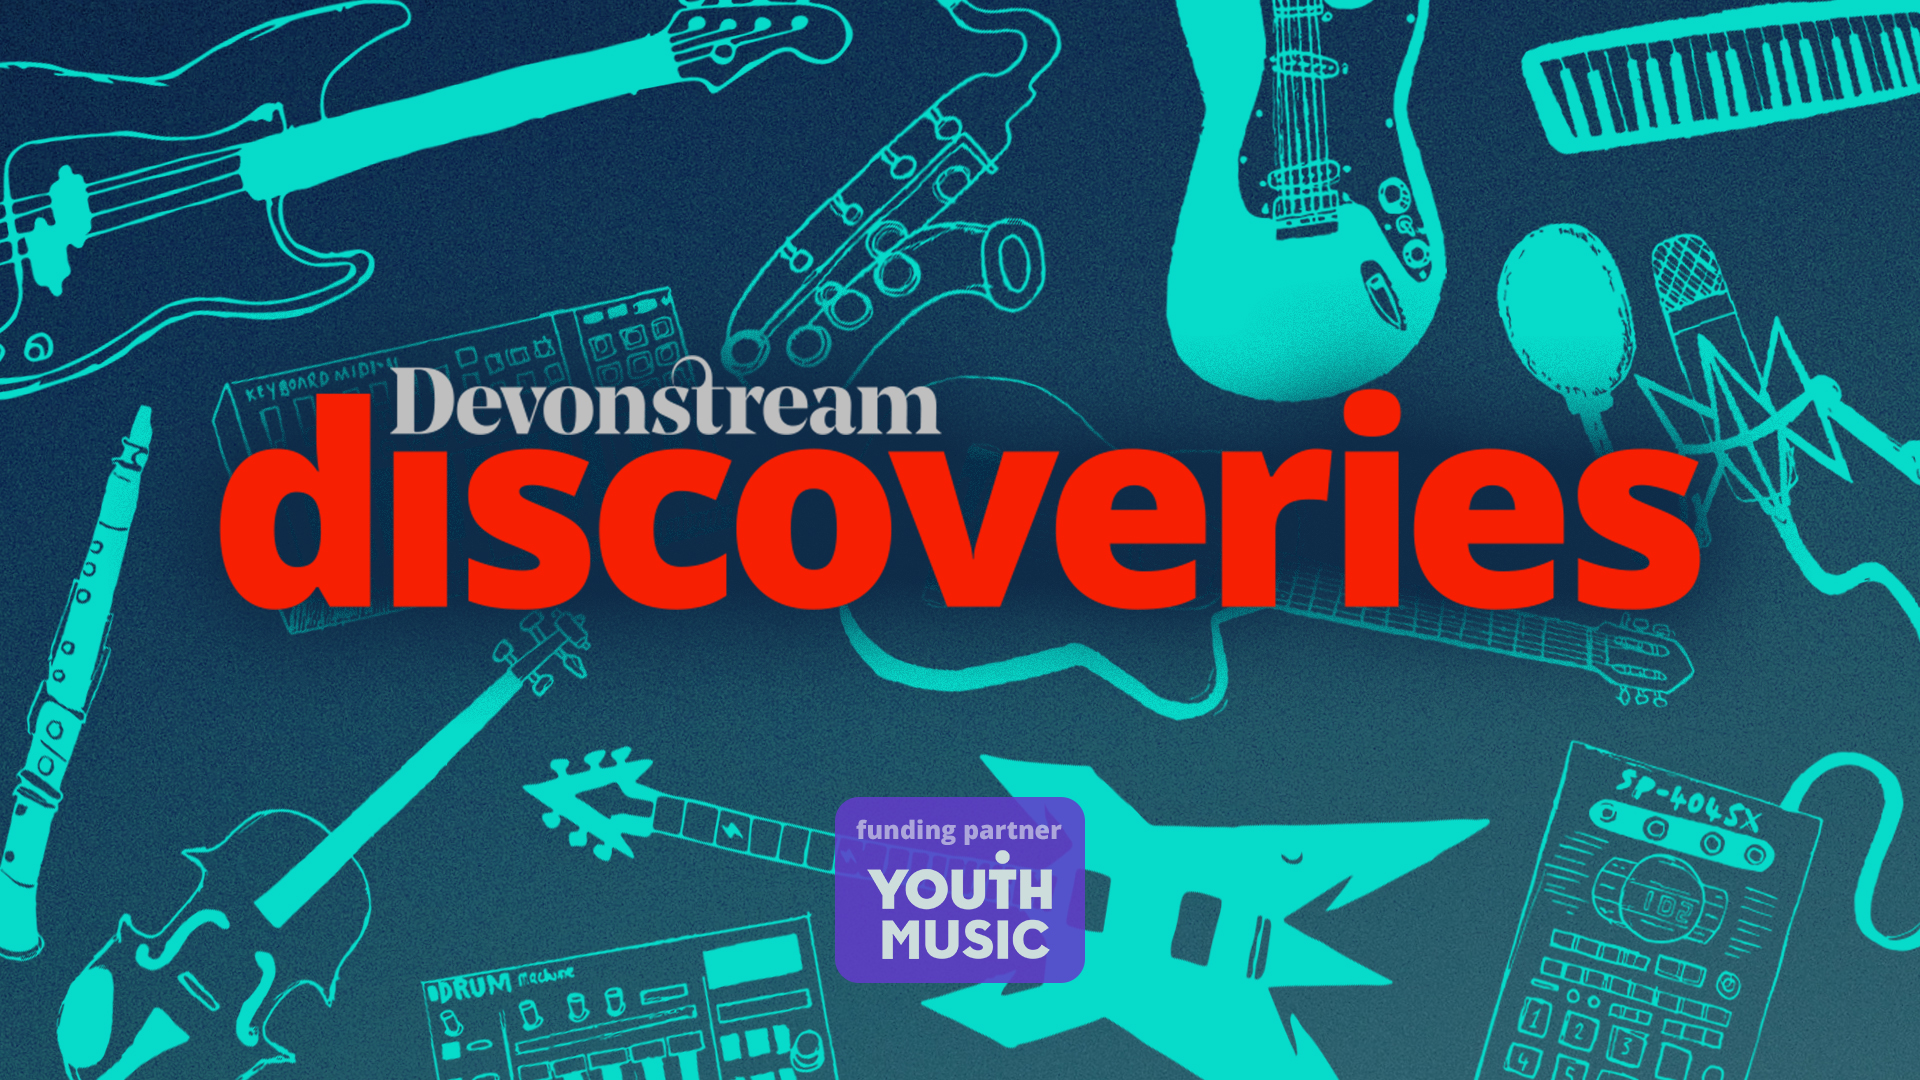 Bright blue hand-drawn illustrations of various musical instruments animated on a dark blue gradient background. The Devonstream Discoveries logo in orange and Youth Music logo in purple overlaid.